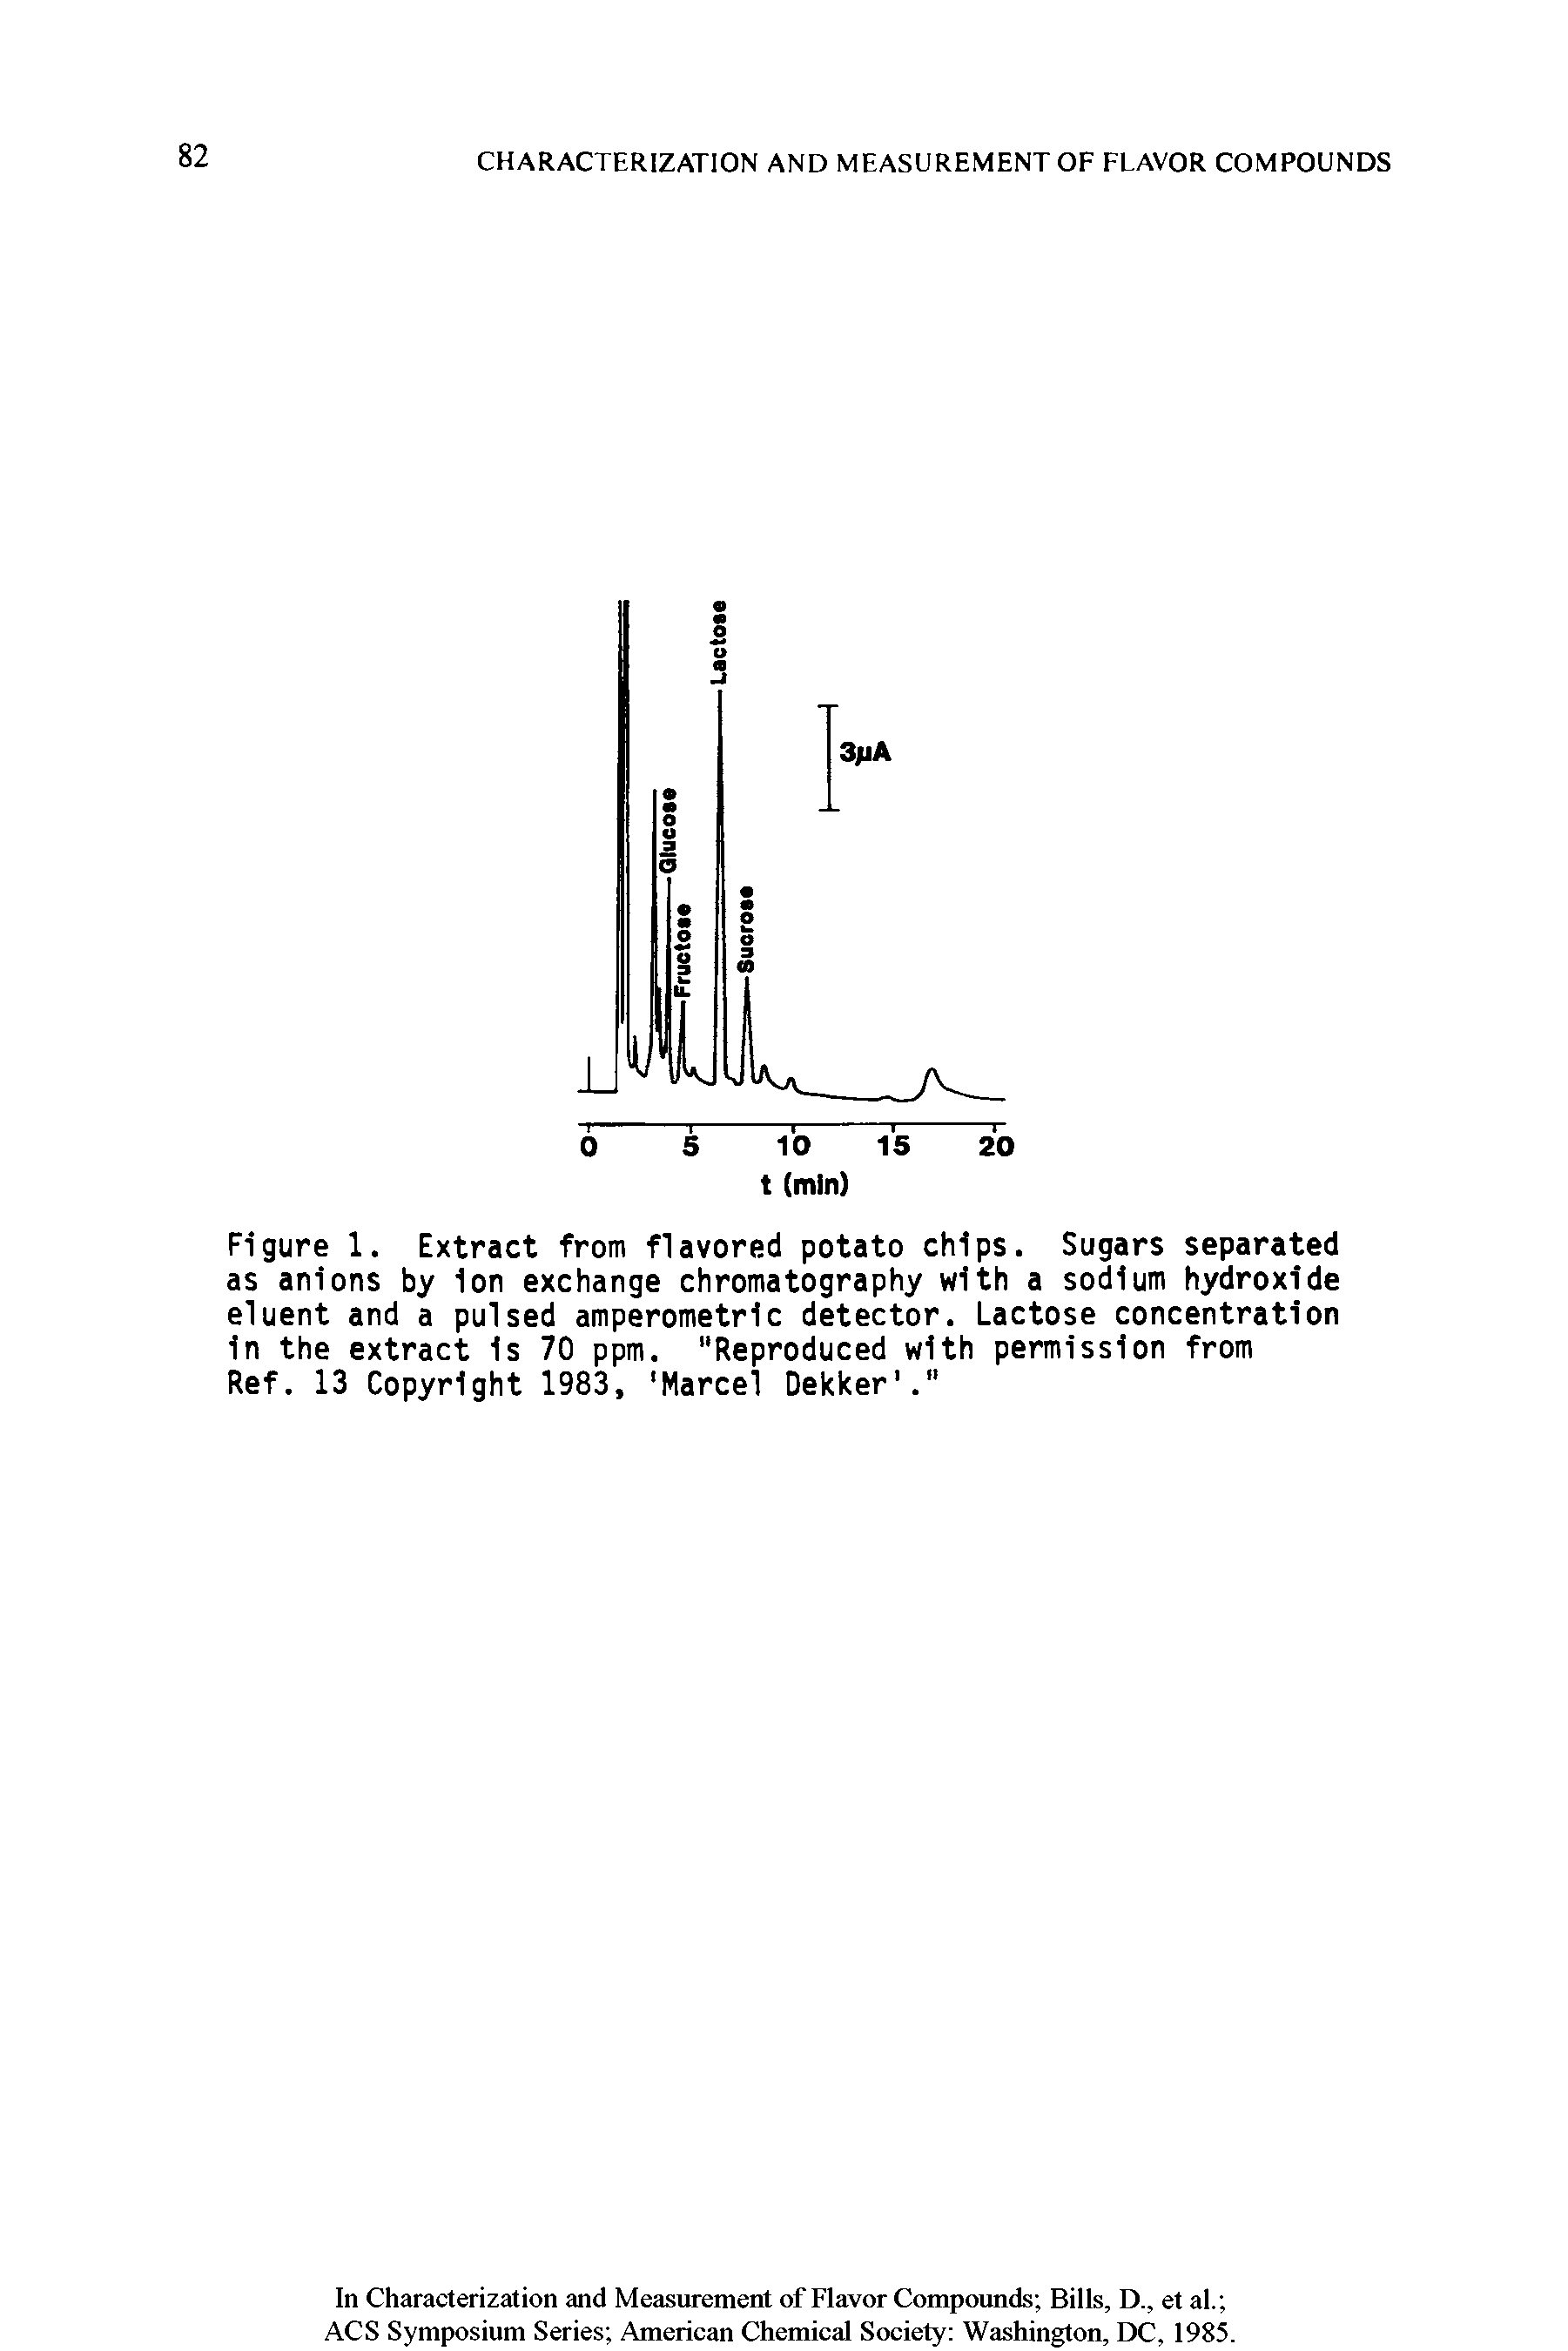 Figure 1. Extract from flavored potato chips. Sugars separated as anions by 1on exchange chromatography with a sodium hydroxide eluent and a pulsed amperometrlc detector. Lactose concentration in the extract Is 70 ppm. "Reproduced with permission from Ref. 13 Copyright 1983, Marcel Dekker. "...